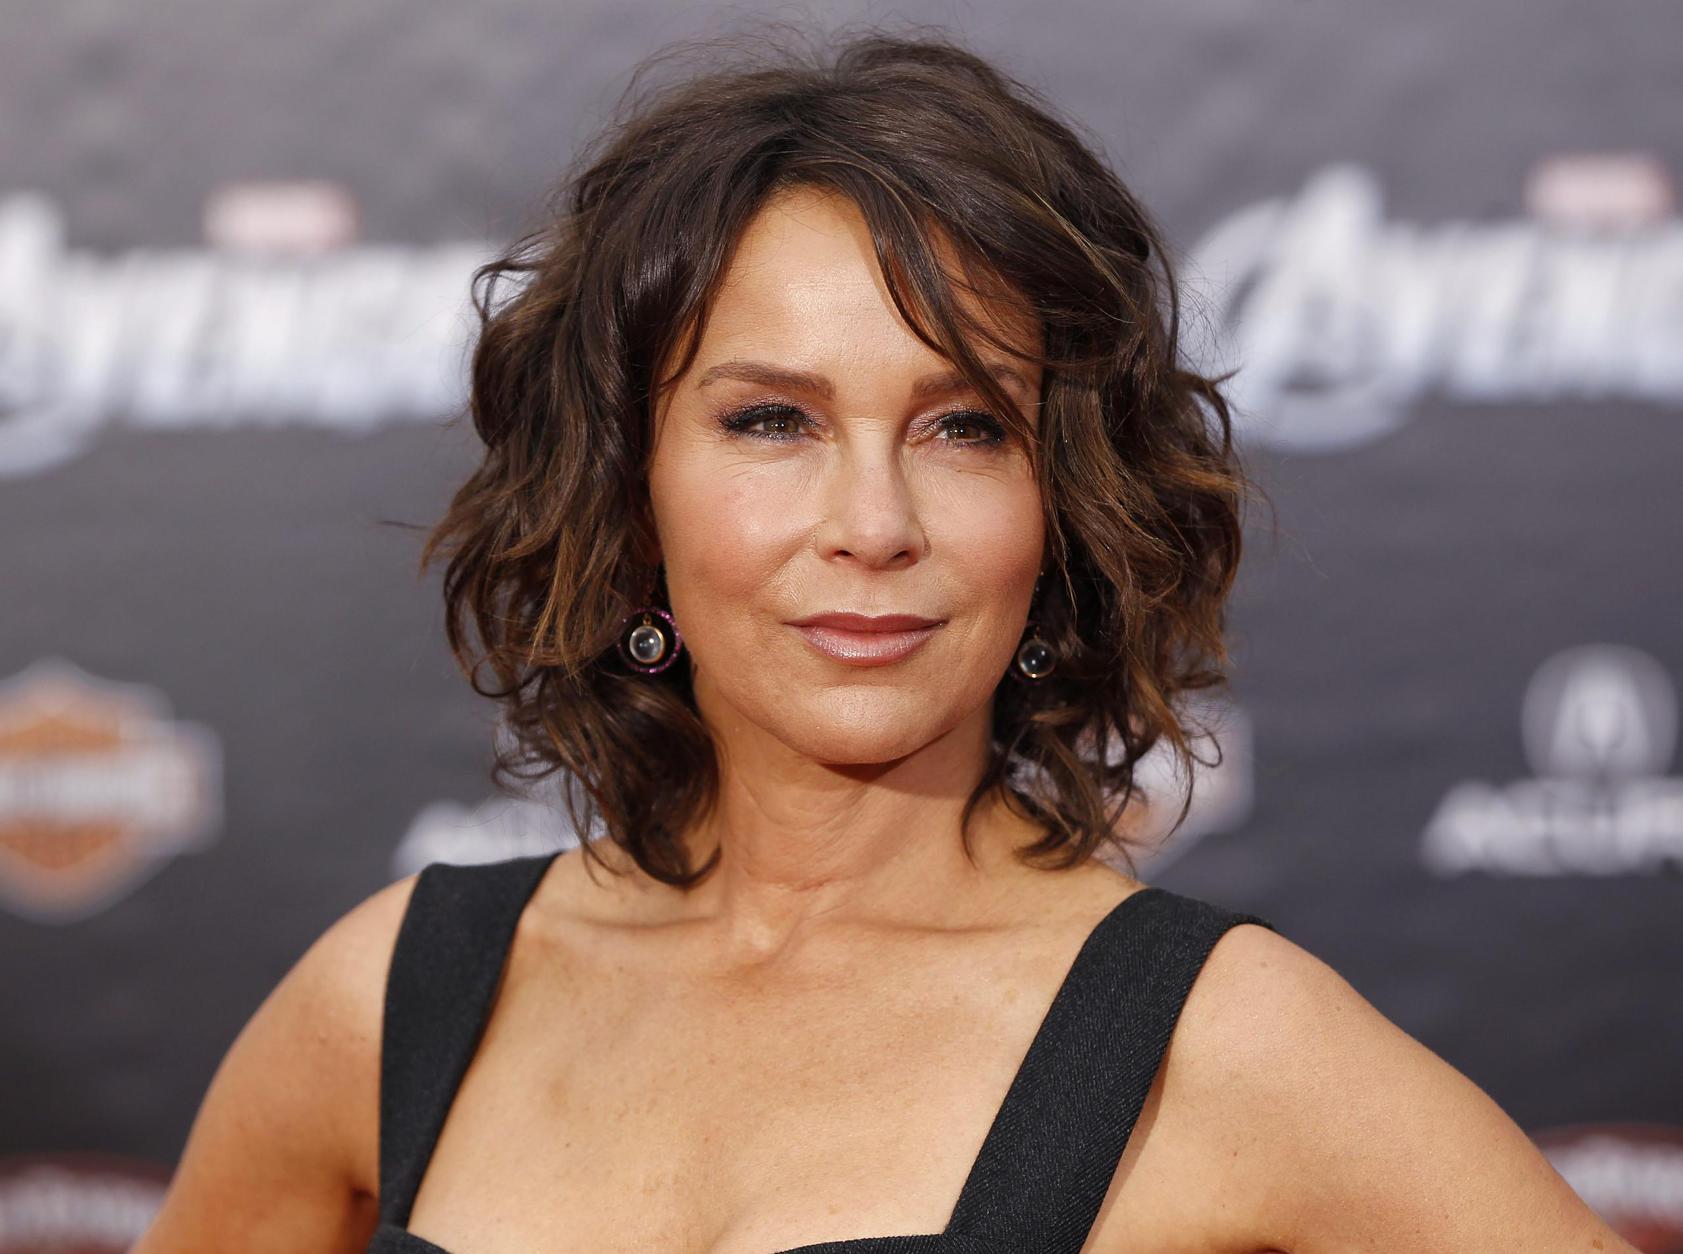 Jennifer Grey was one of the recognizable stars in the 1980s, but after two...